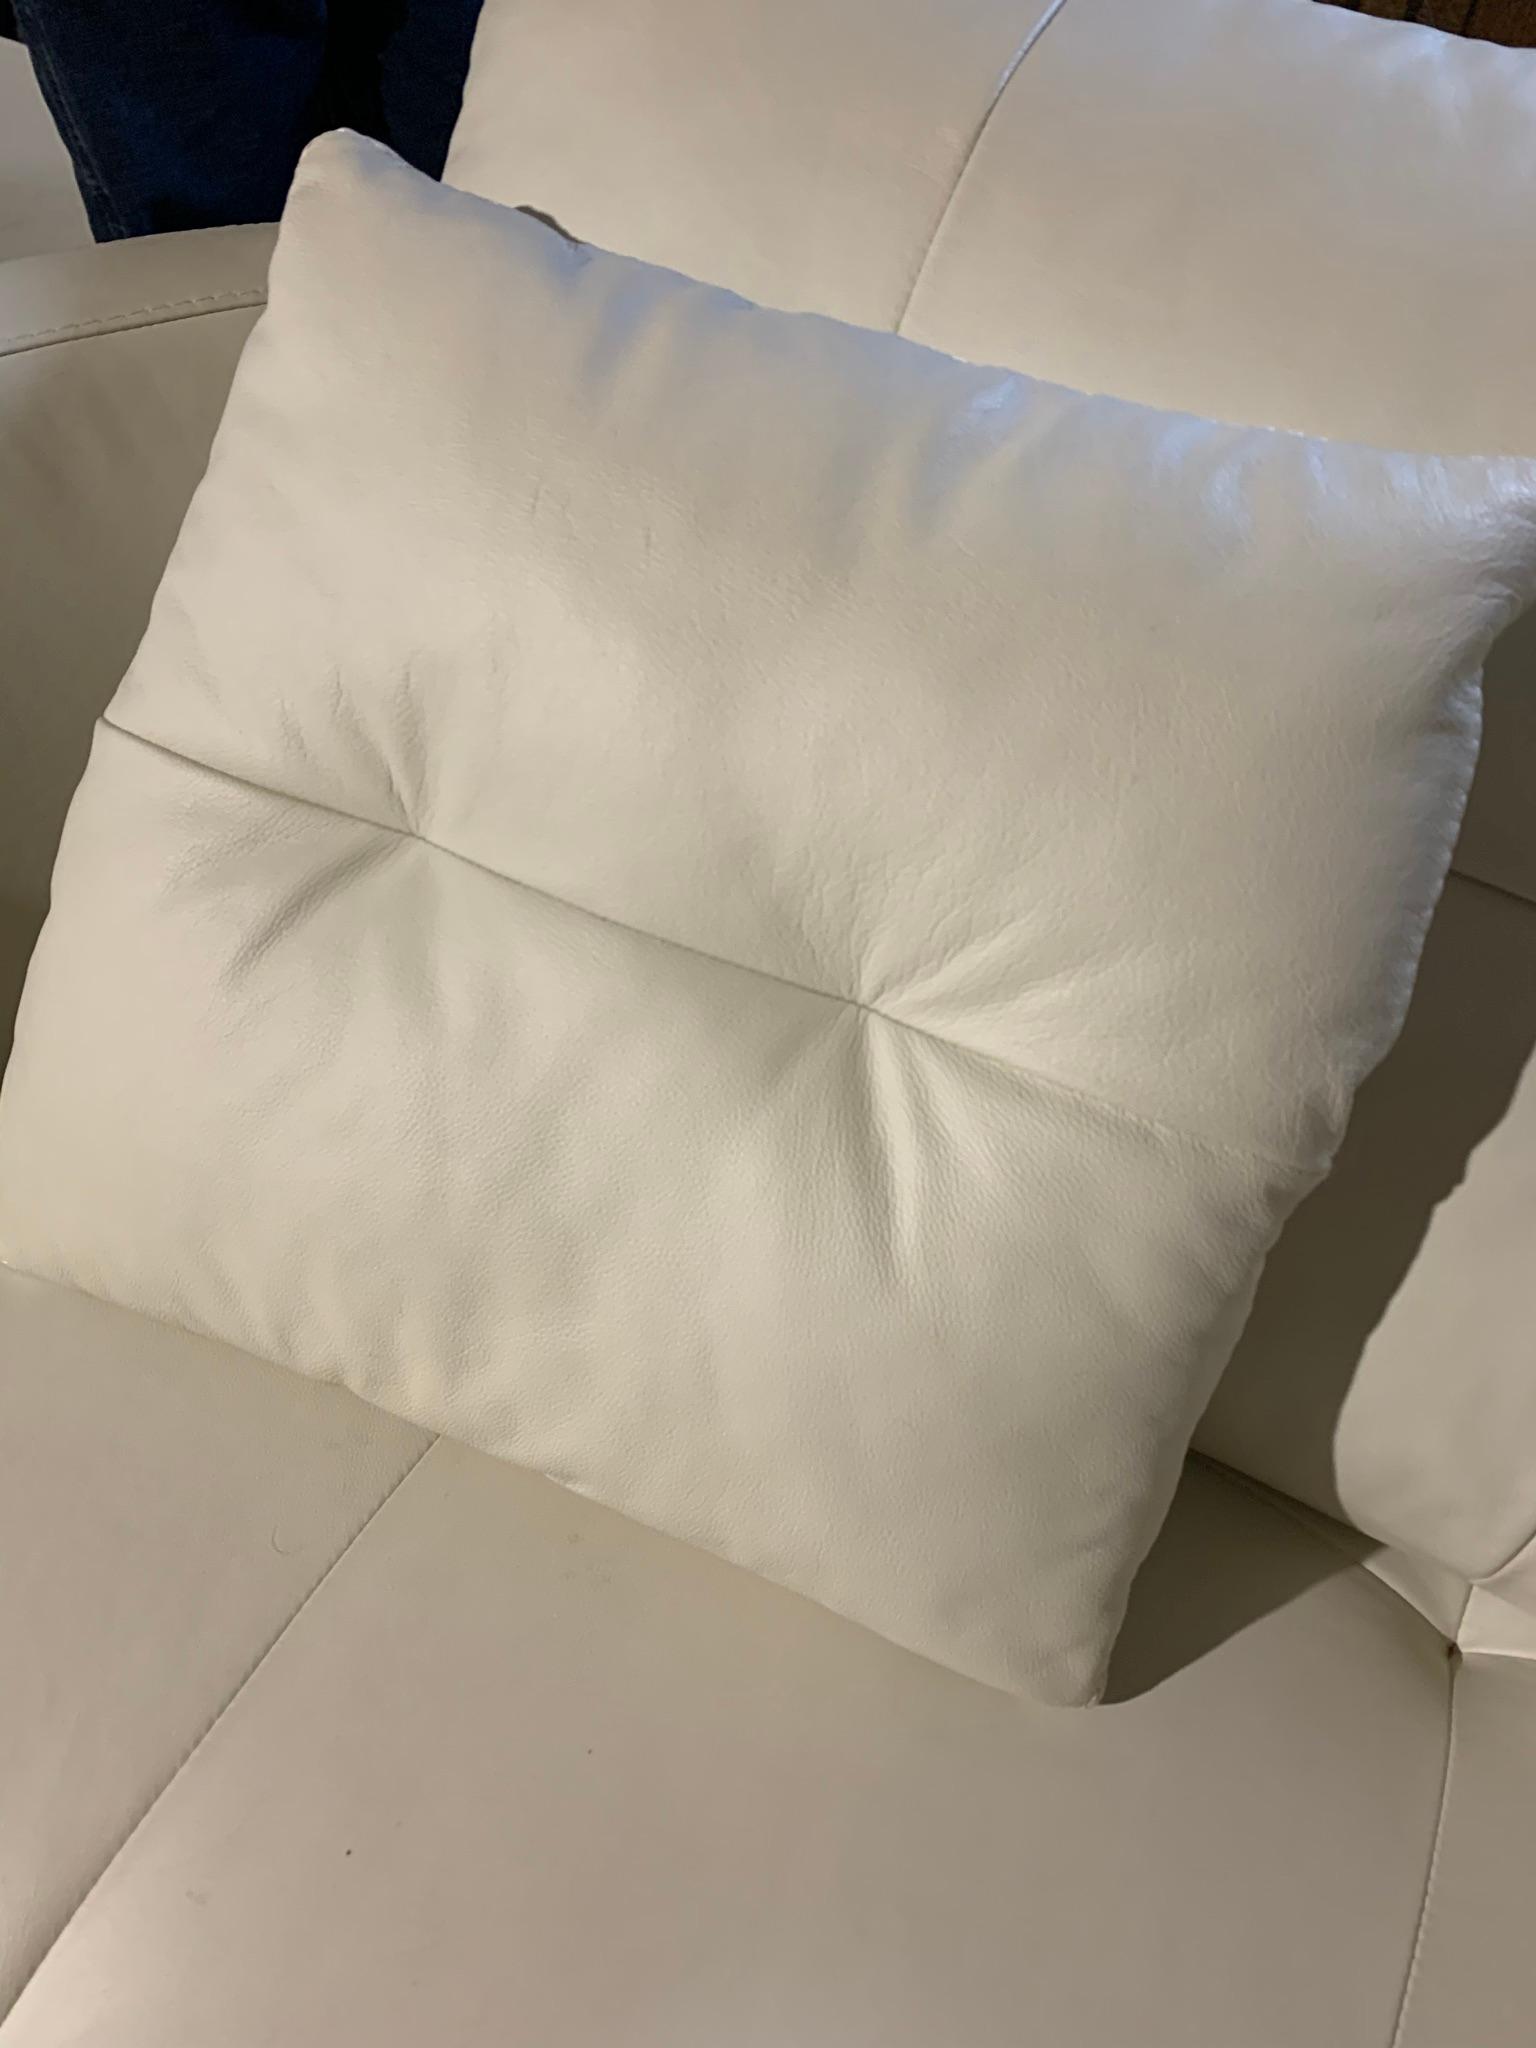 Contemporary Style White Leather or leather look  Chair.